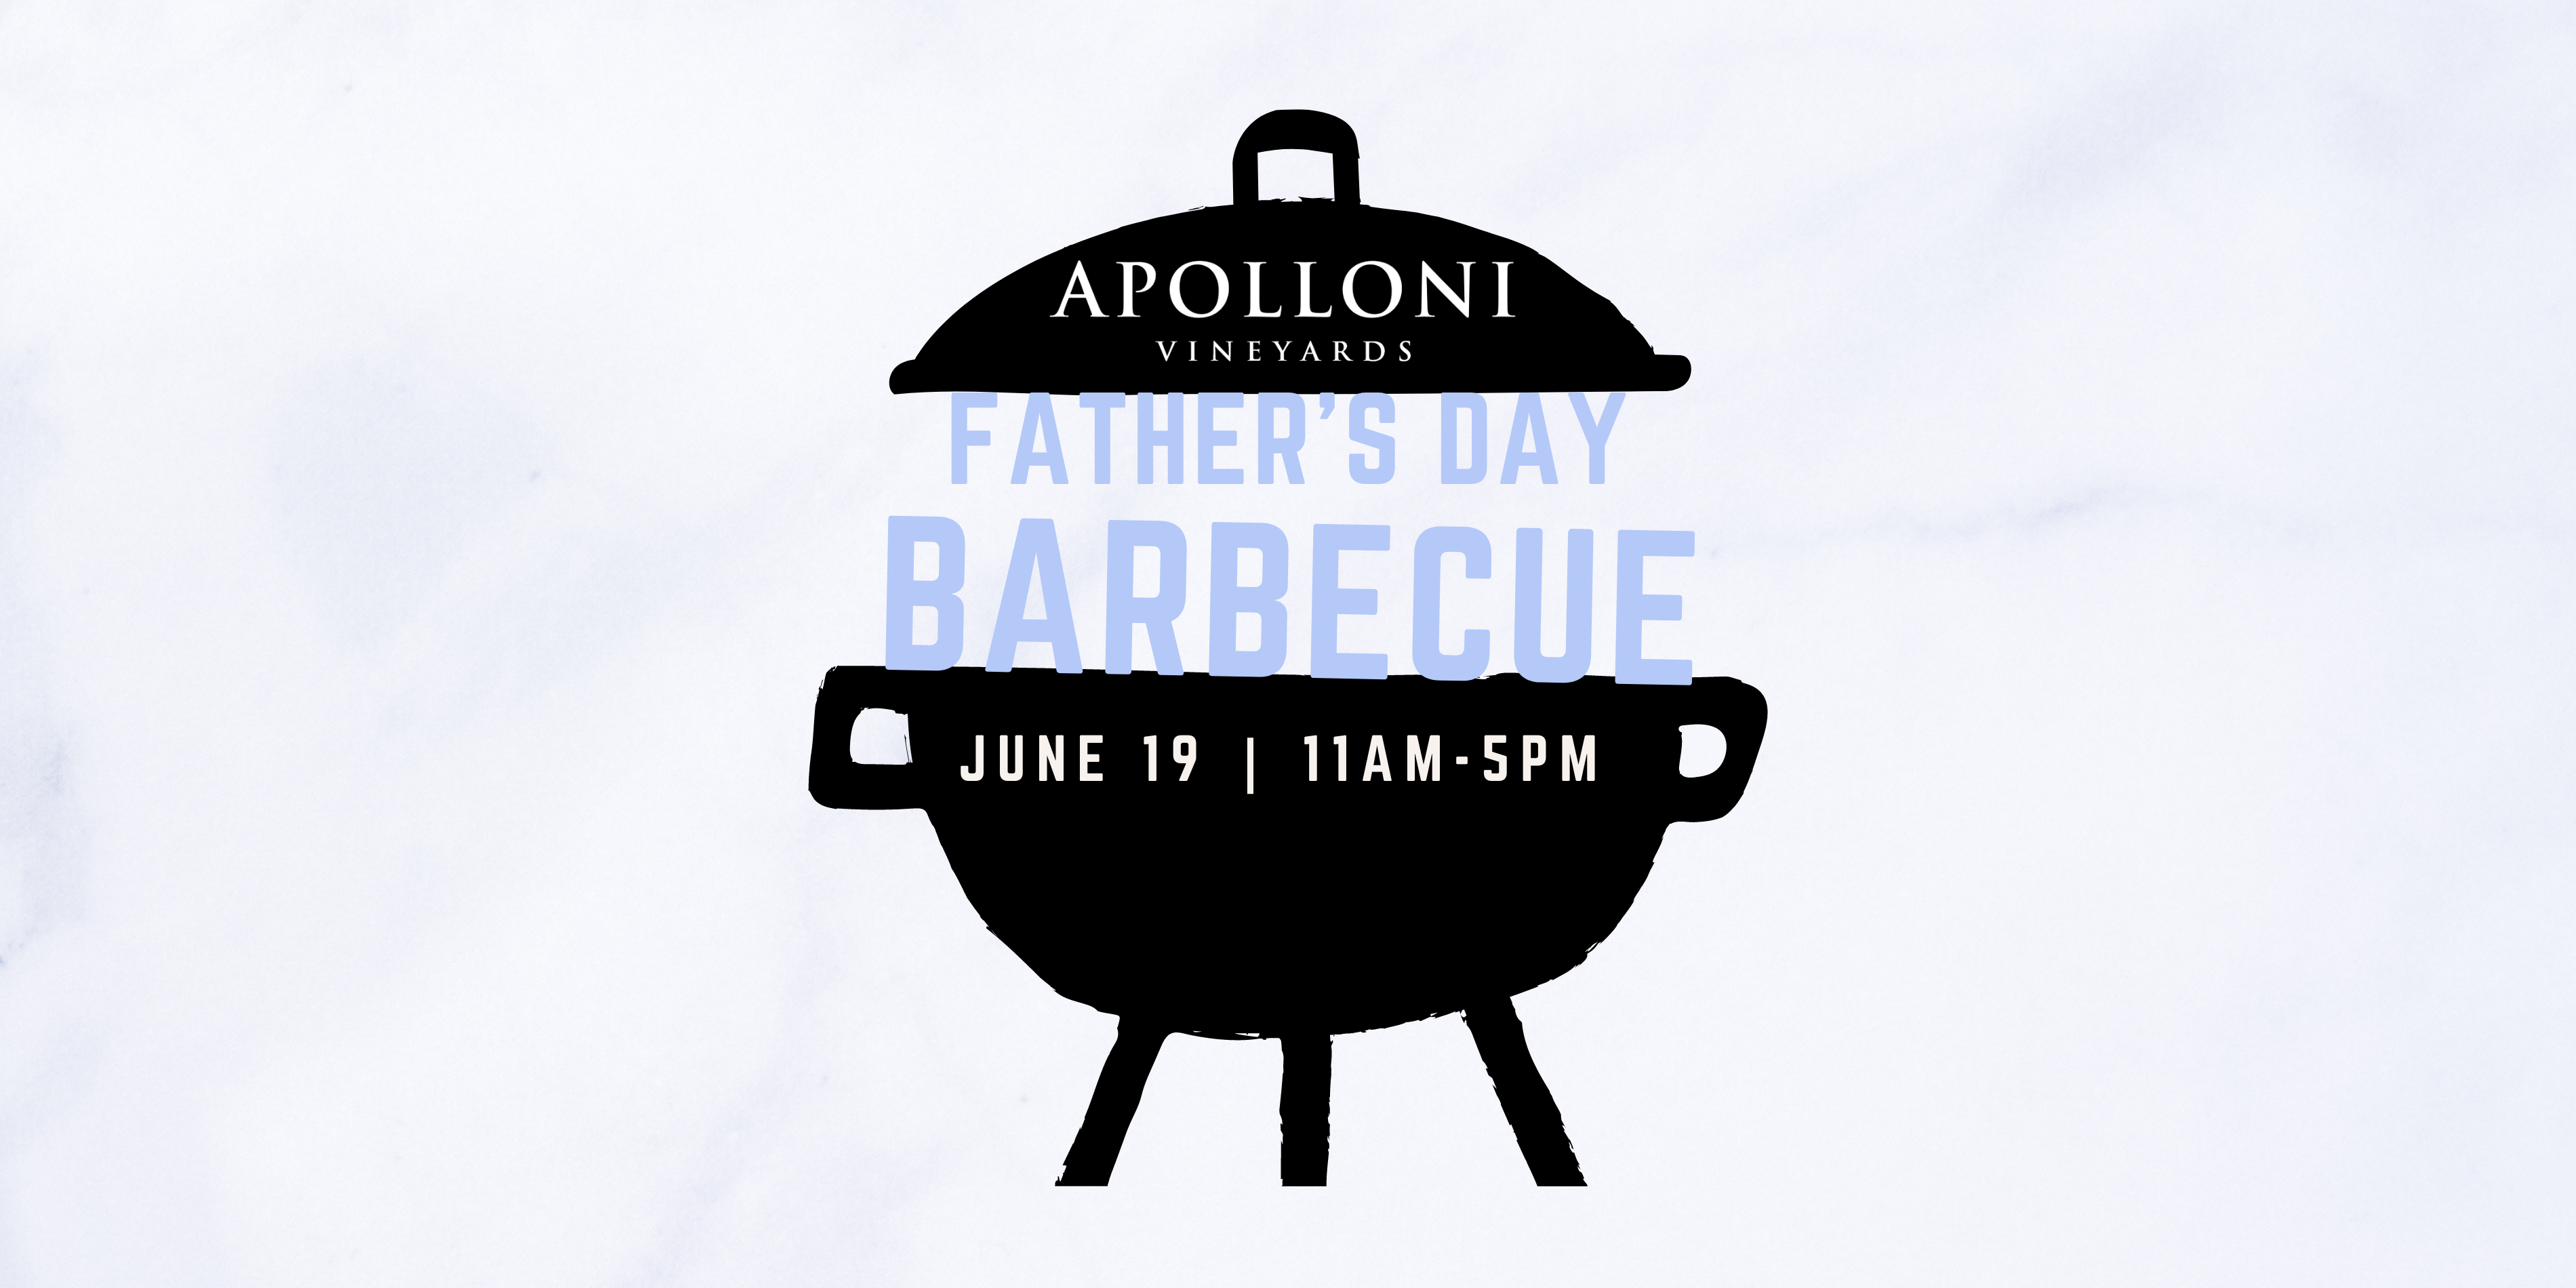 Apolloni Vineyards Father's Day Barbecue